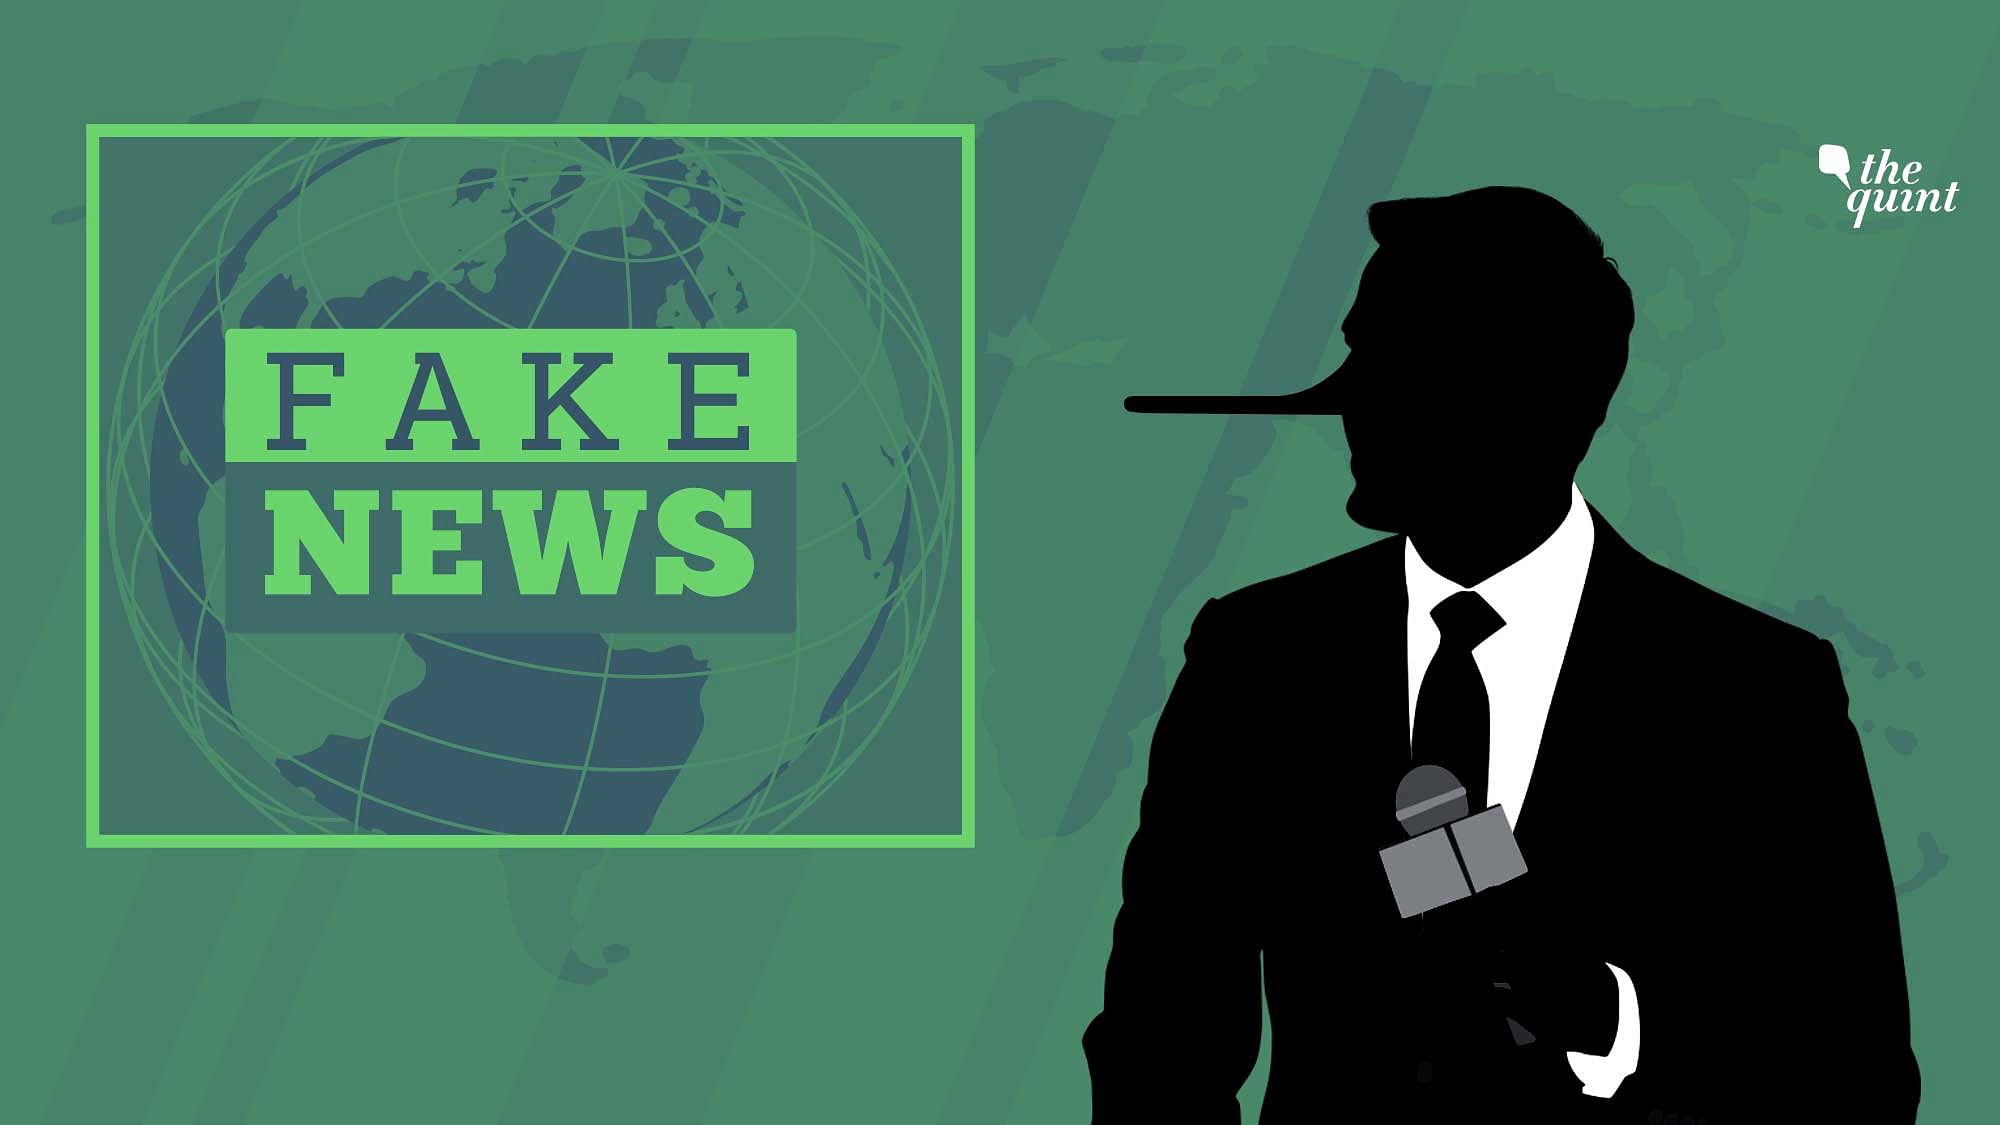 What happens when media is at the very end of publishing fake news and propaganda?